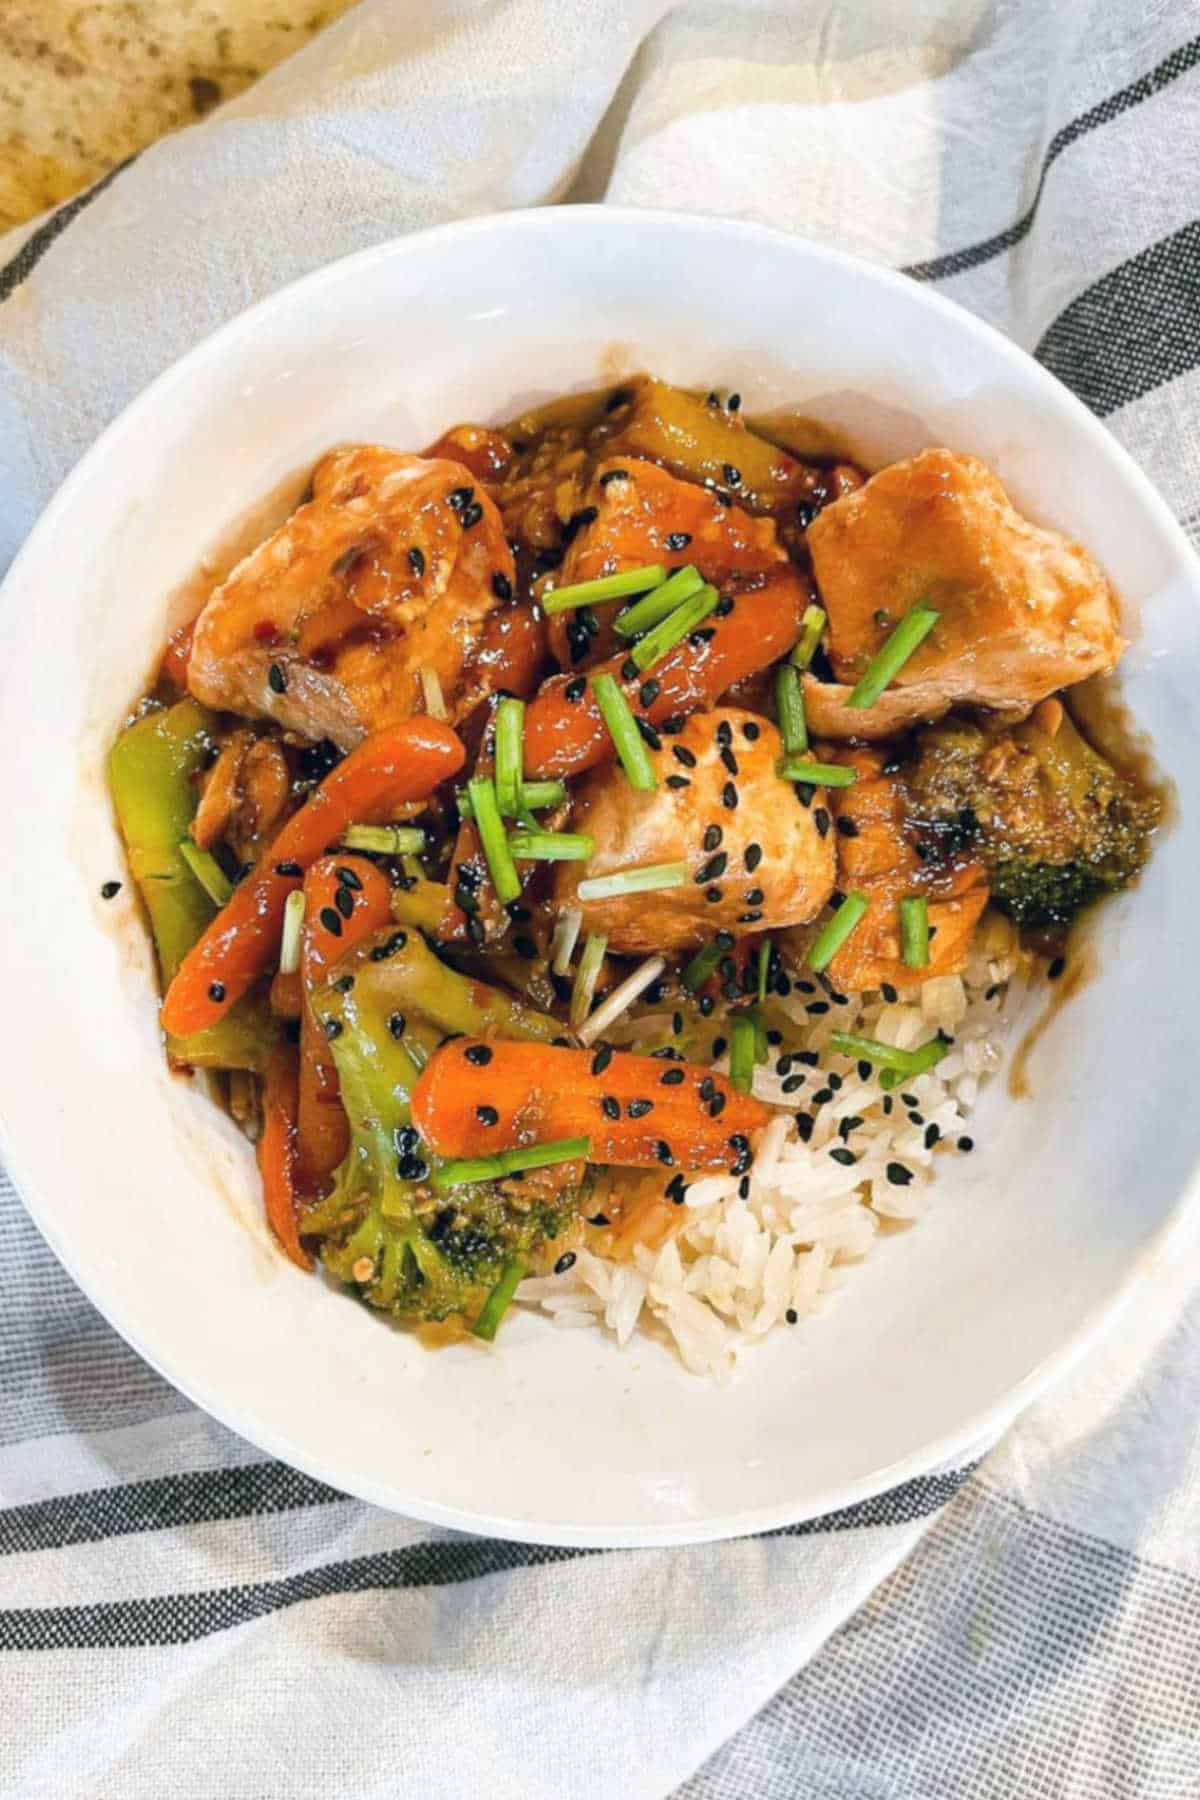 Salmon, green onions, carrots, broccoli, and rice in a white bowl.